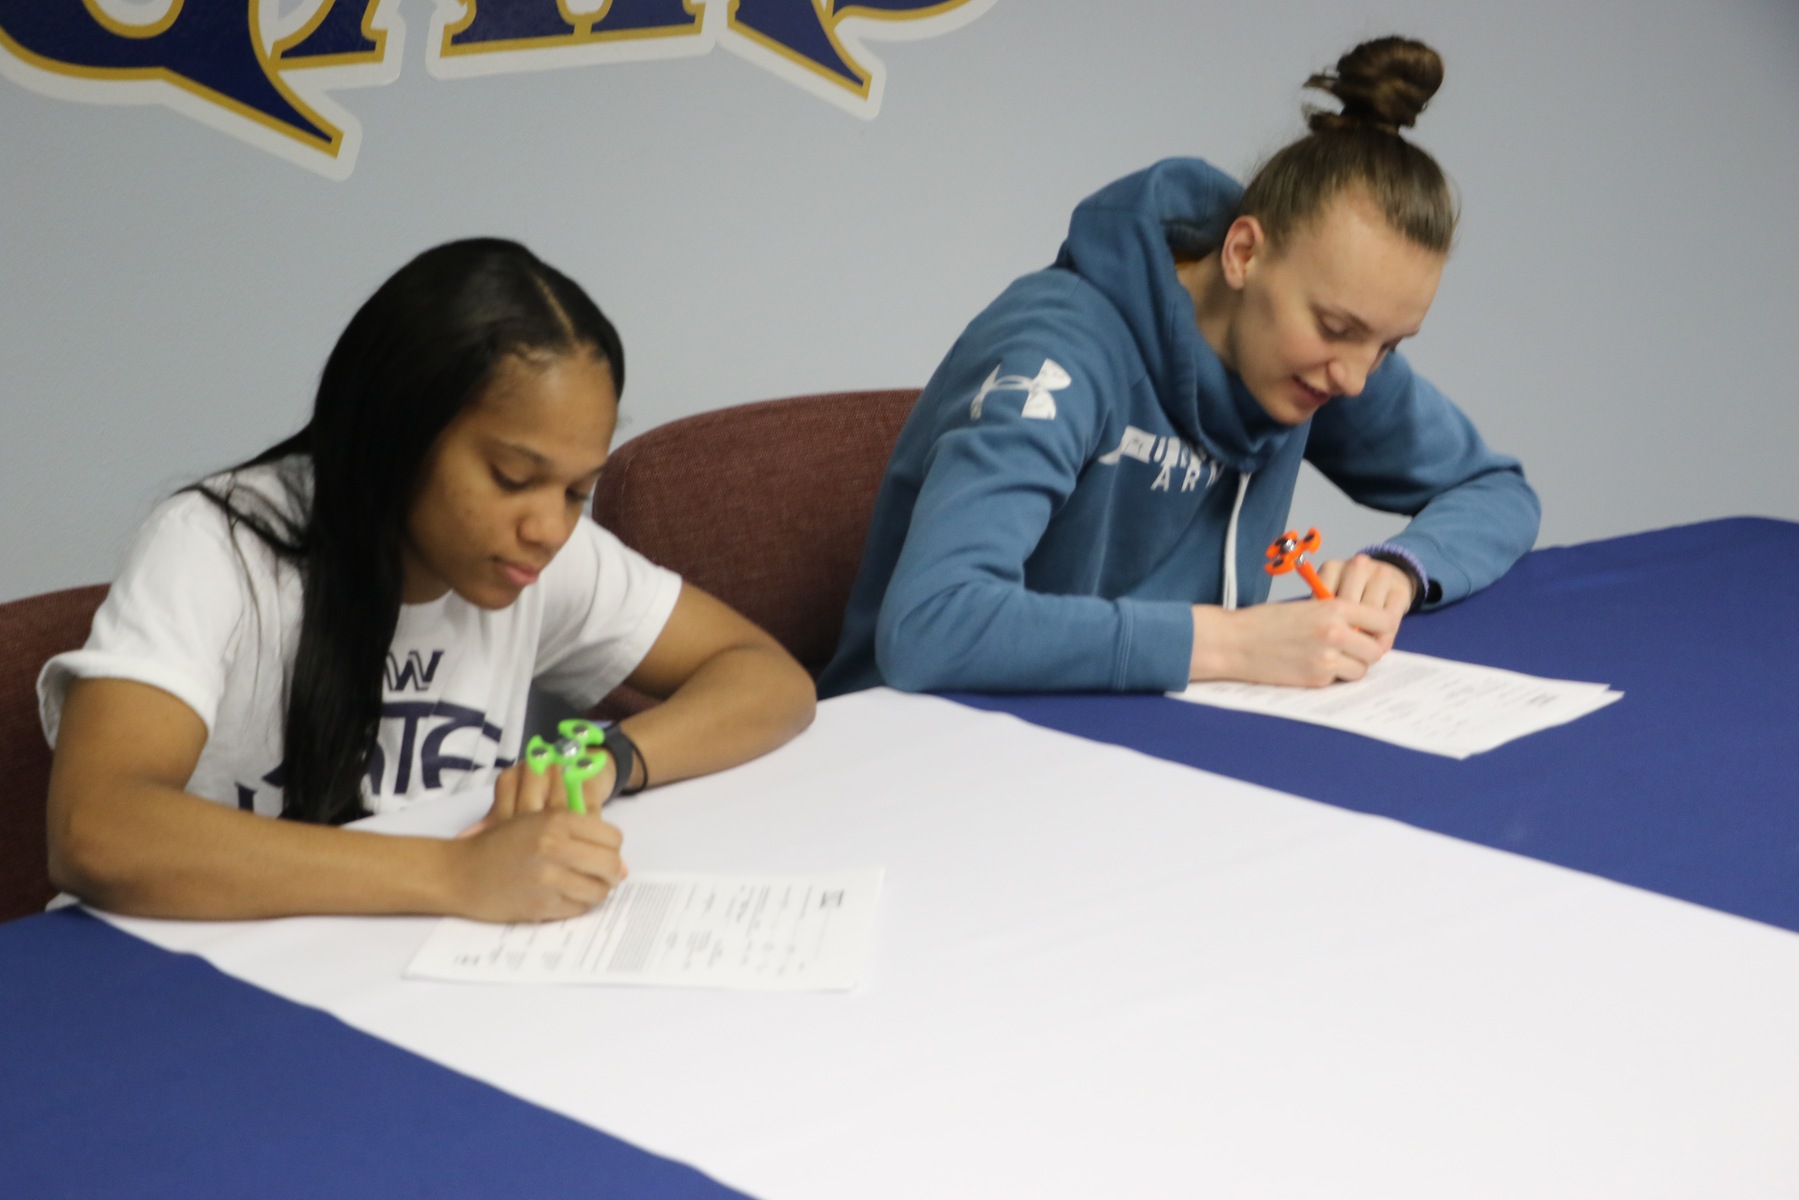 WNCC women’s basketball players ink with Division I Longwood University